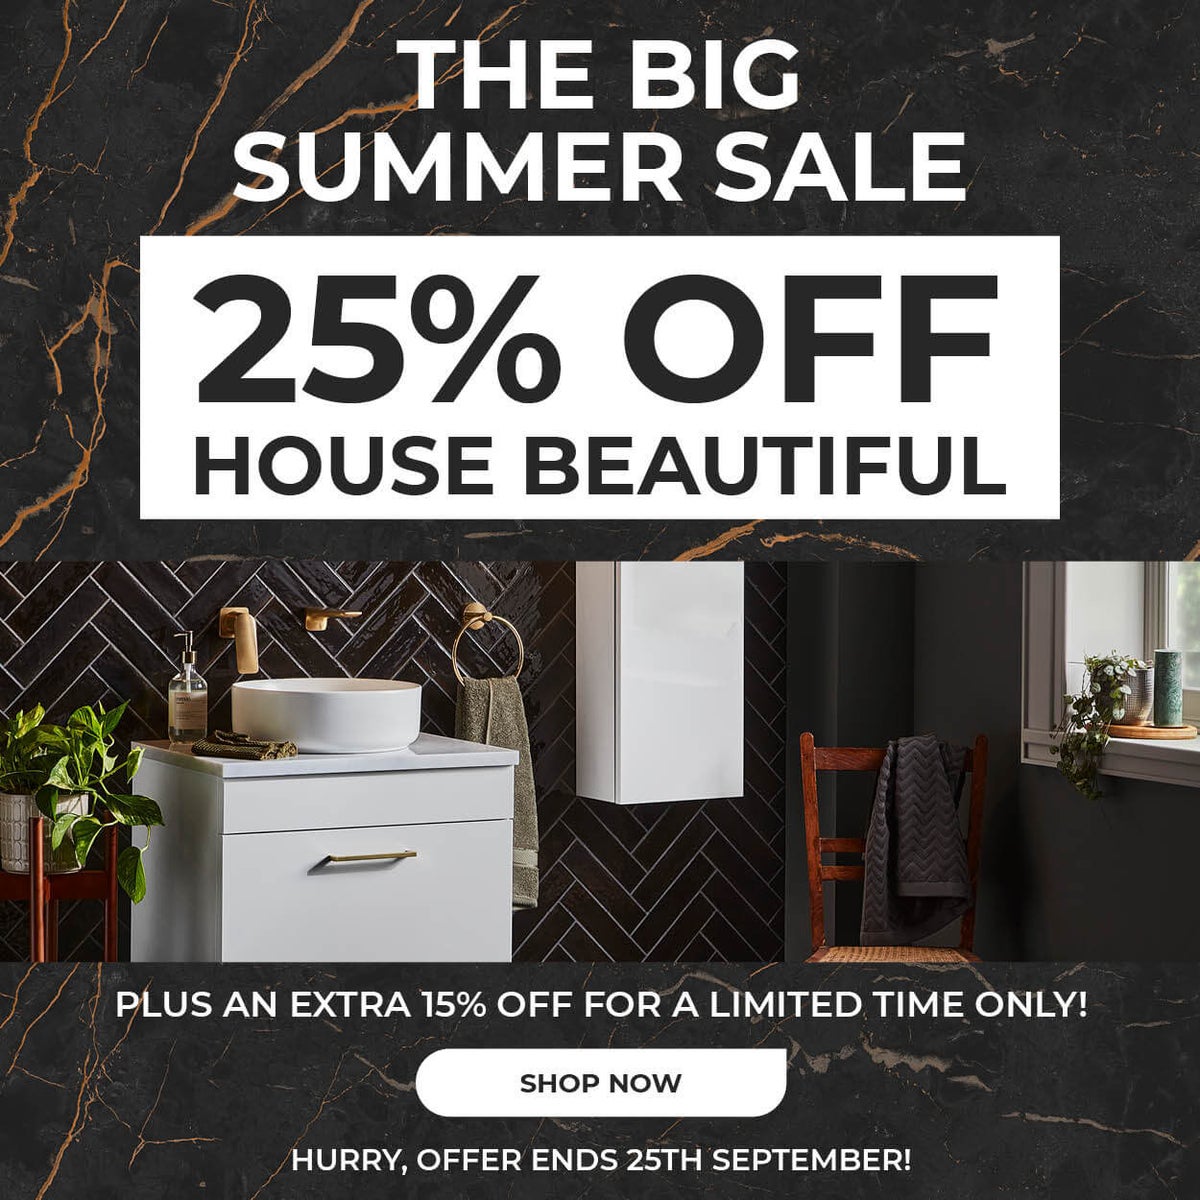 25% off House Beautiful furniture range, plus an extra 15% off until 25th September 2022